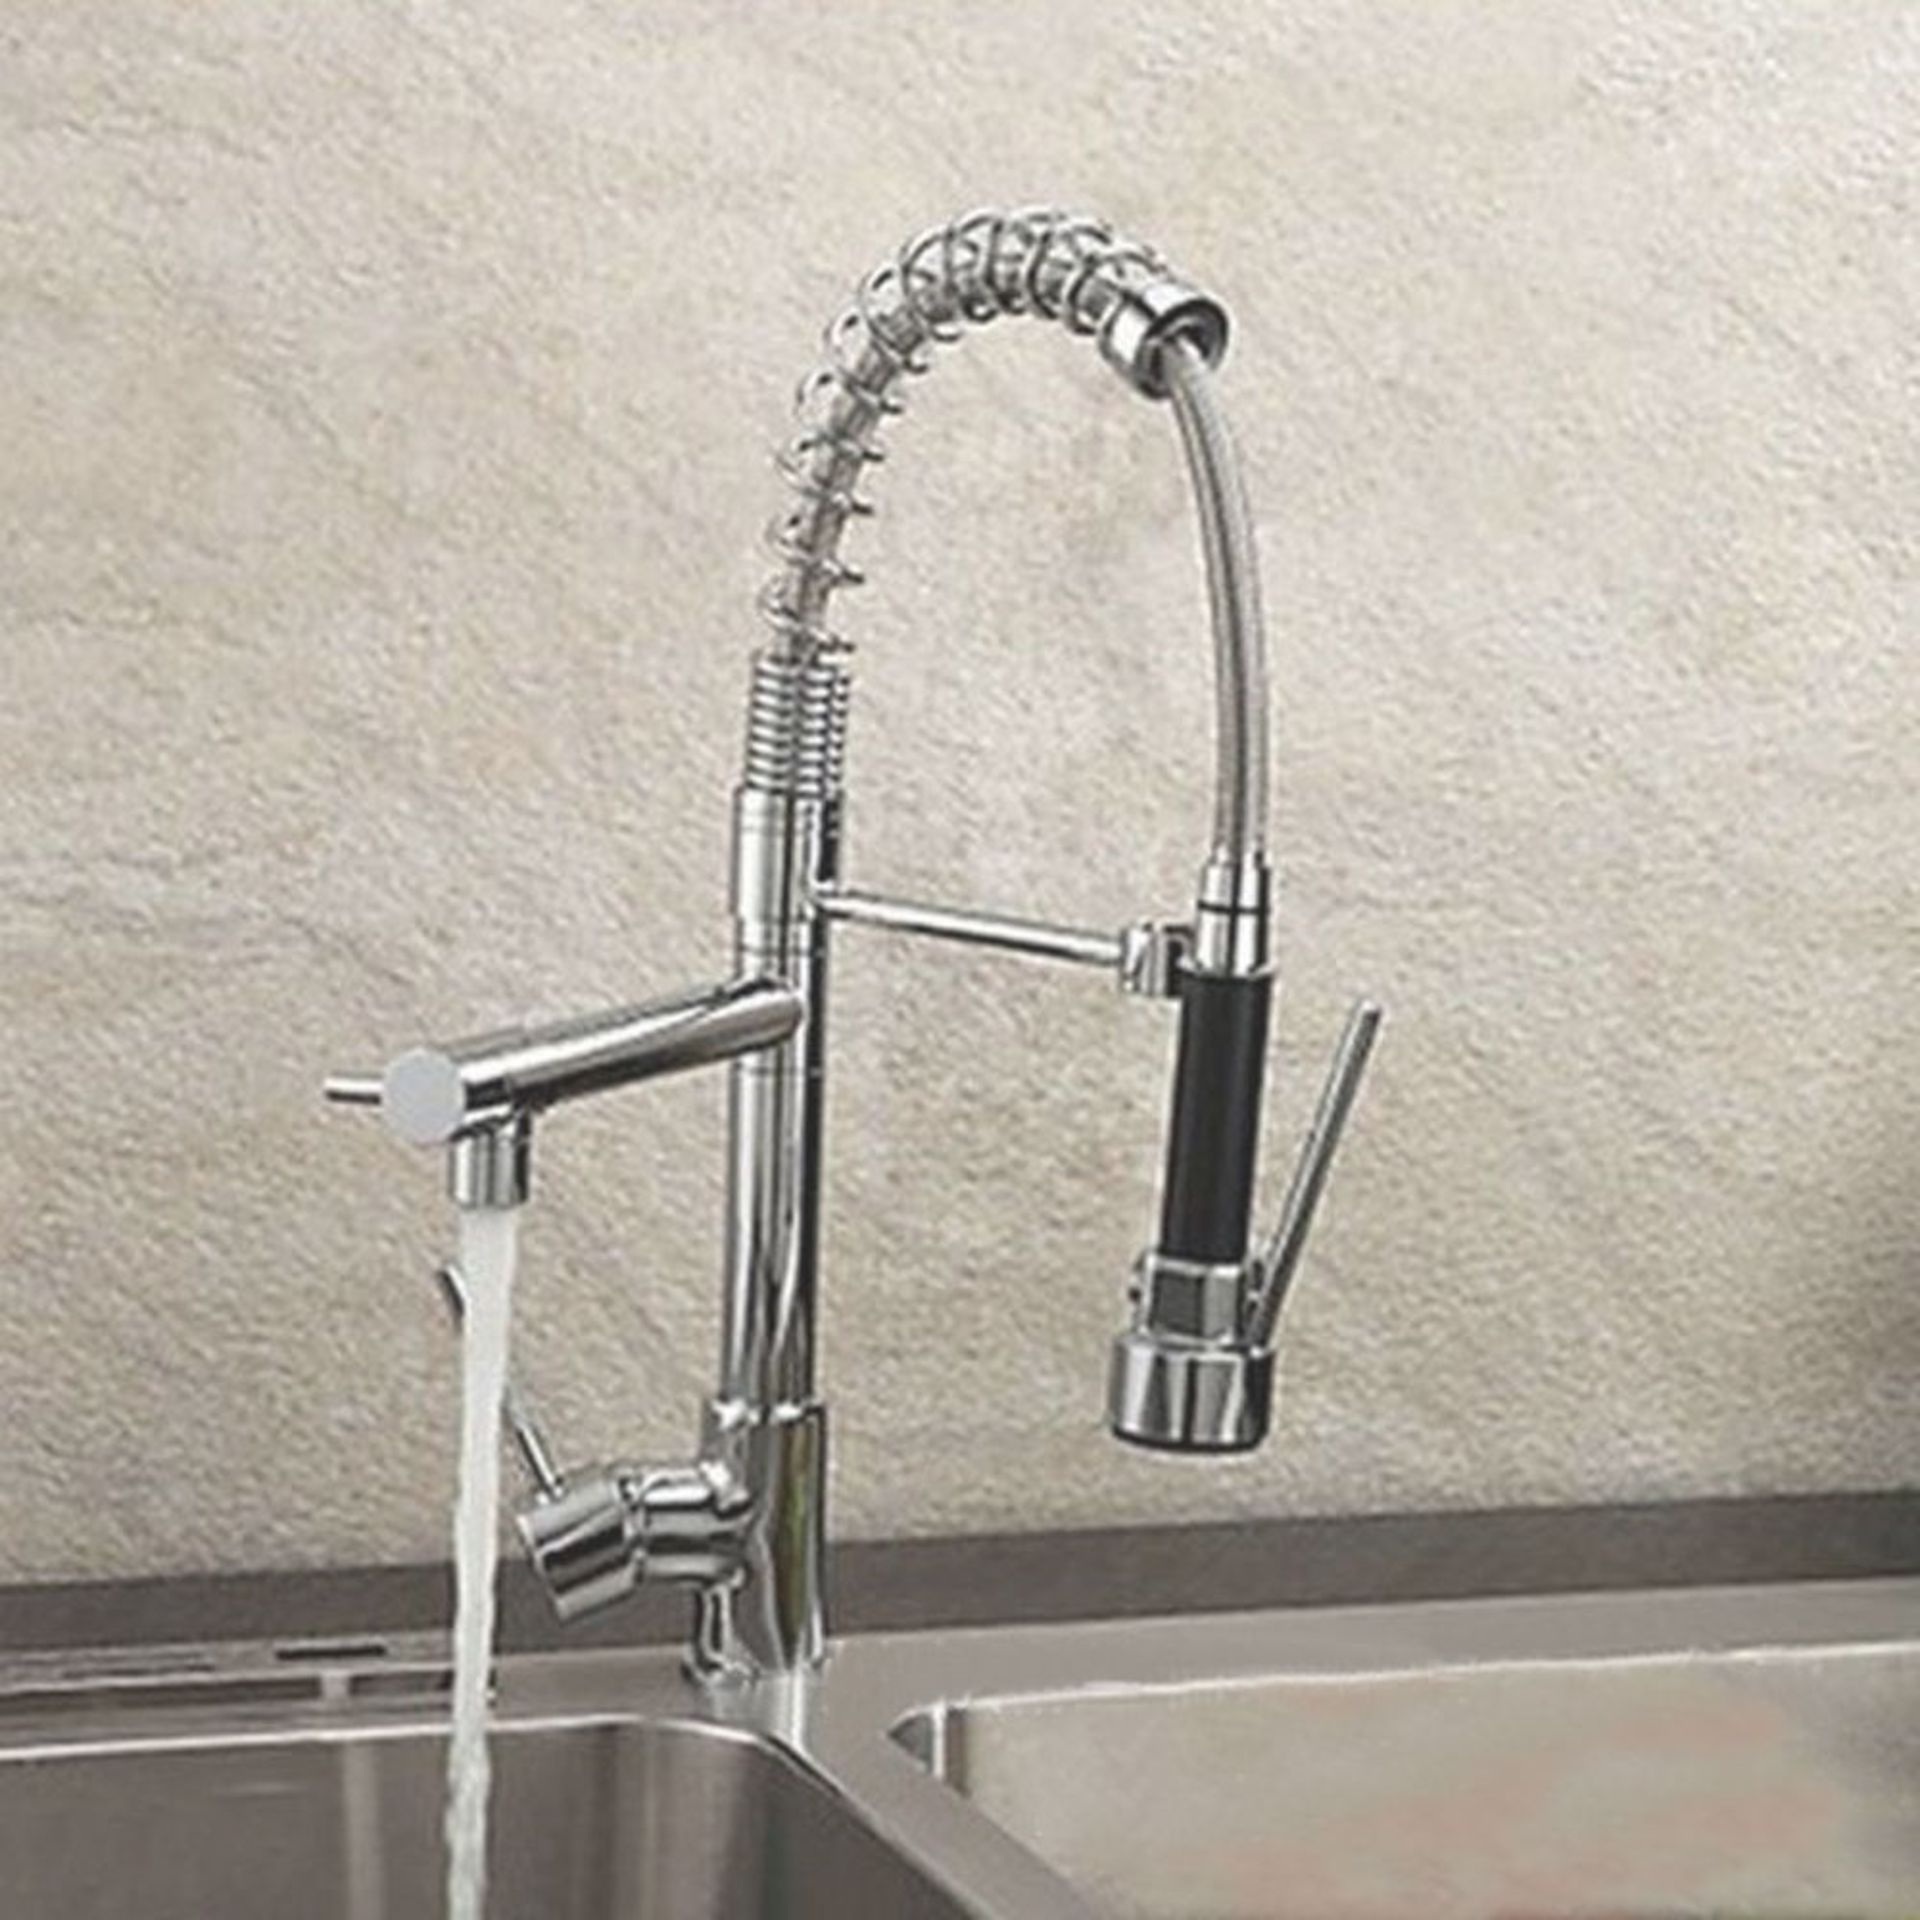 Bentley Modern Monobloc Chrome Brass Pull Out Spray Mixer Tap. RRP £349.99.This tap is from ... - Image 2 of 4